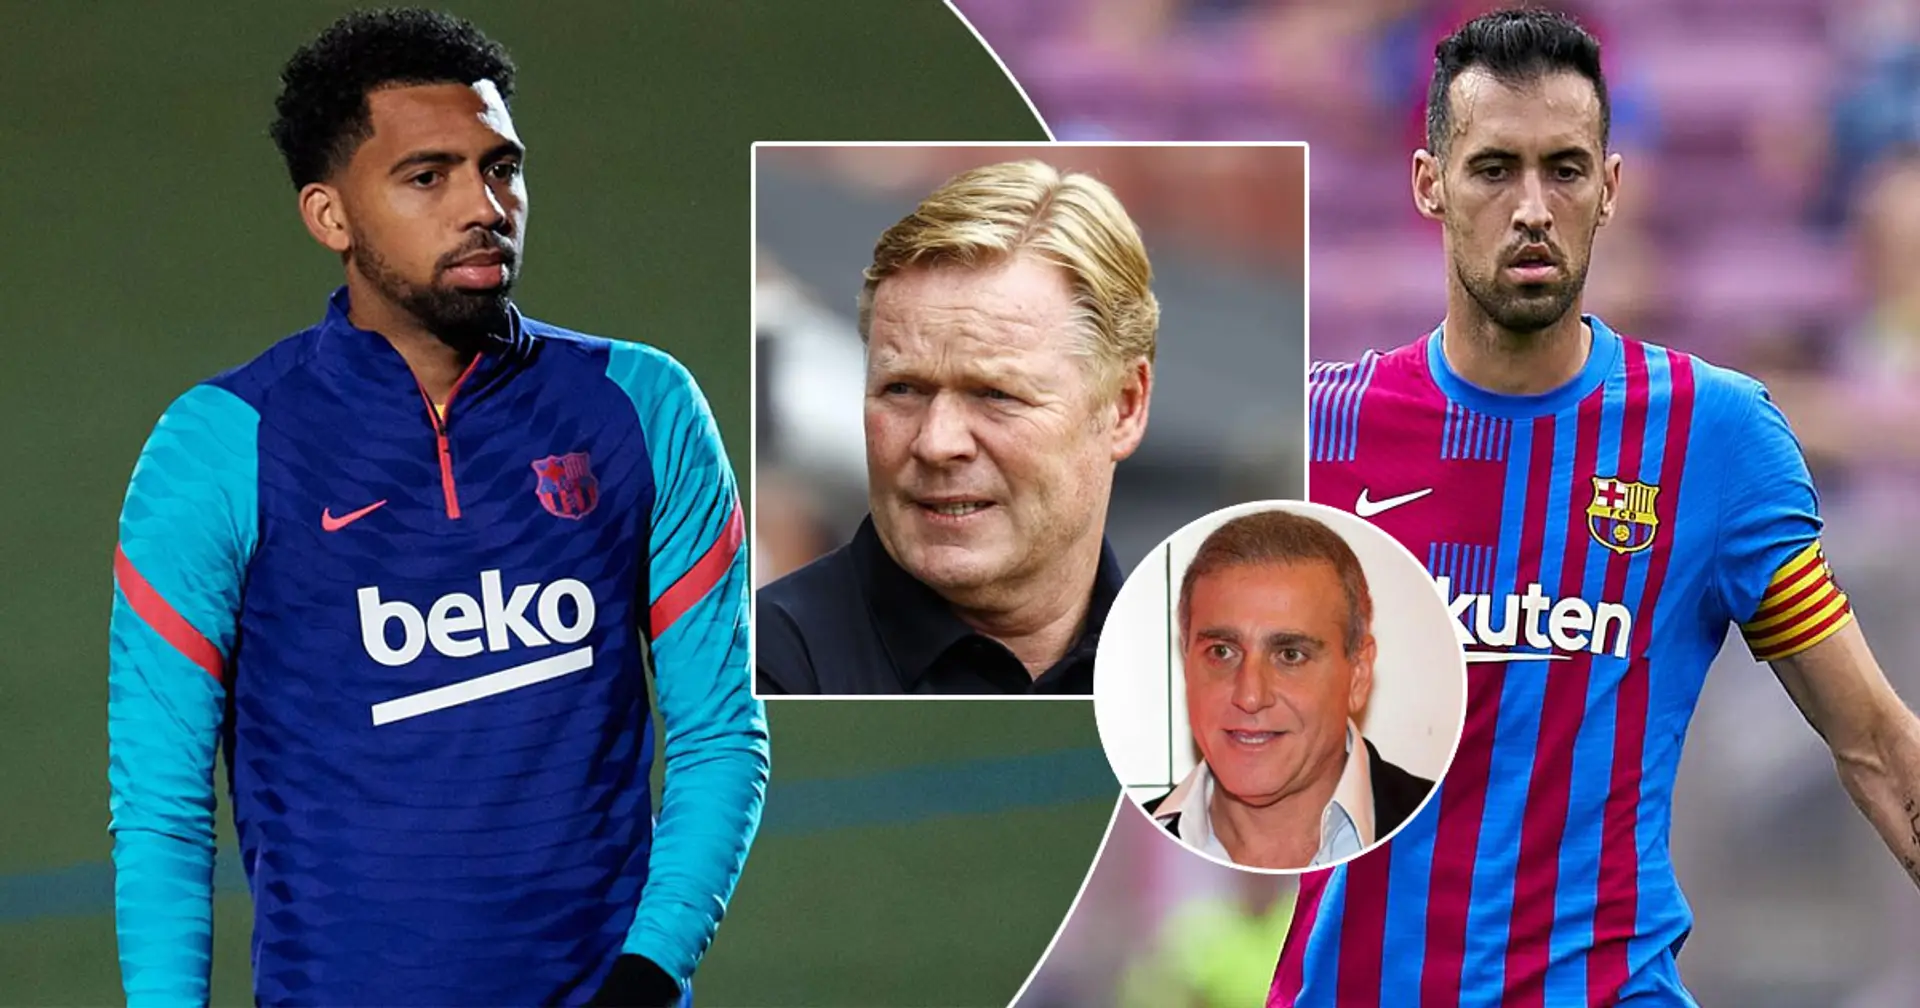 'He has the qualities to be the new Busquets': scout explains Matheus move to Barca, slams Koeman